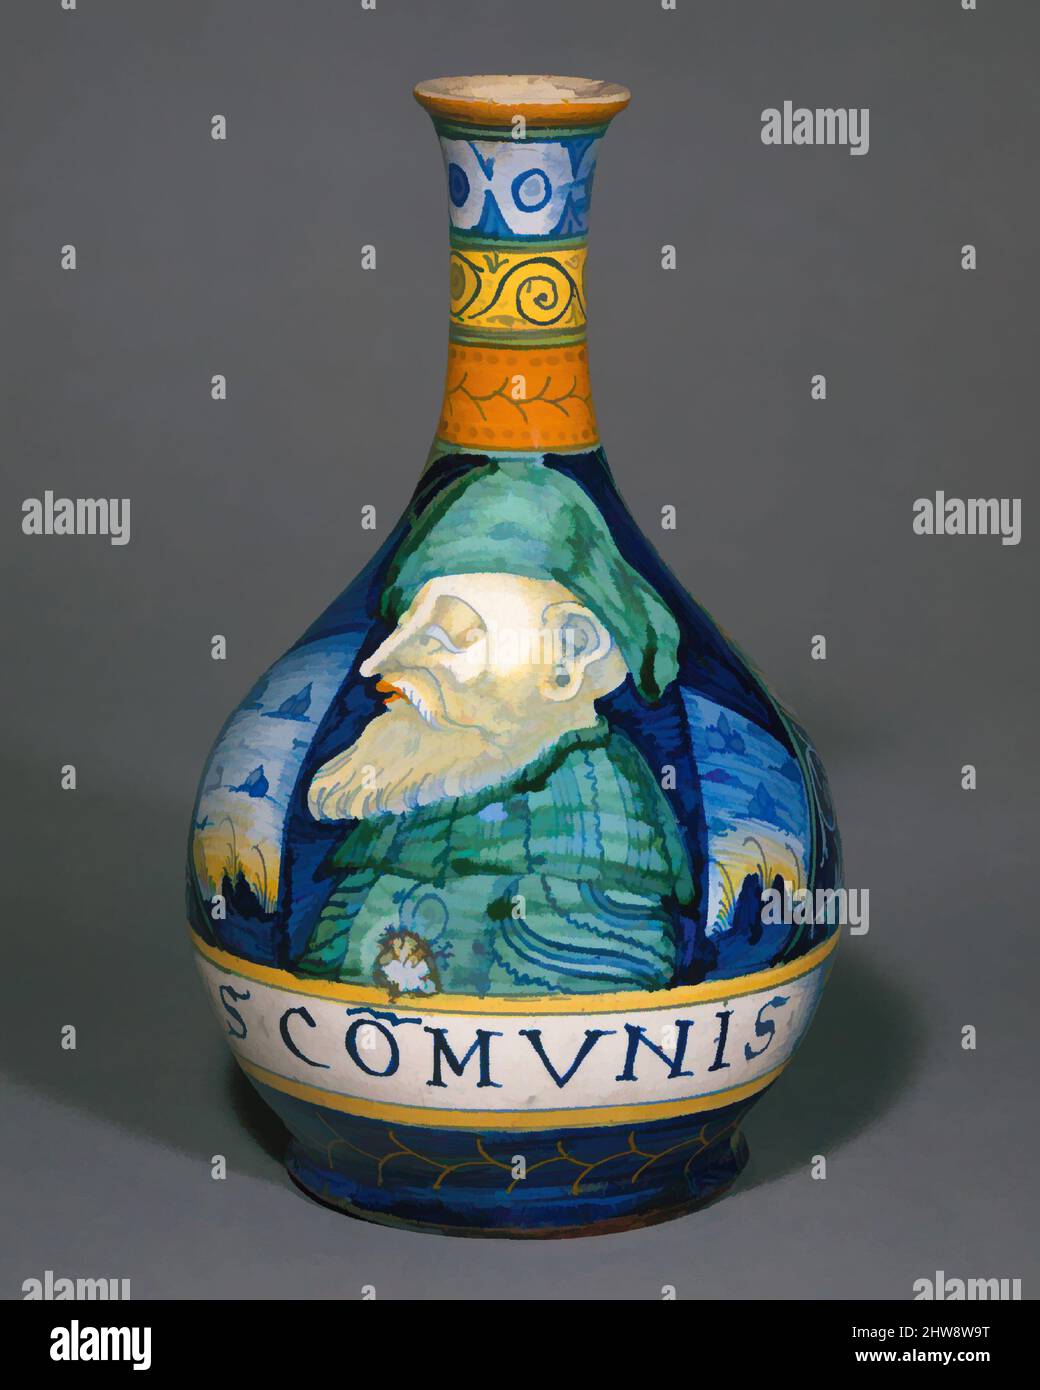 Art inspired by Apothecary bottle (fiasca da farmacia), ca. 1530–40, Italian, Castelli, Maiolica (tin-glazed earthenware), Height: 9 15/16 in. (25.2 cm), Ceramics-Pottery, Classic works modernized by Artotop with a splash of modernity. Shapes, color and value, eye-catching visual impact on art. Emotions through freedom of artworks in a contemporary way. A timeless message pursuing a wildly creative new direction. Artists turning to the digital medium and creating the Artotop NFT Stock Photo